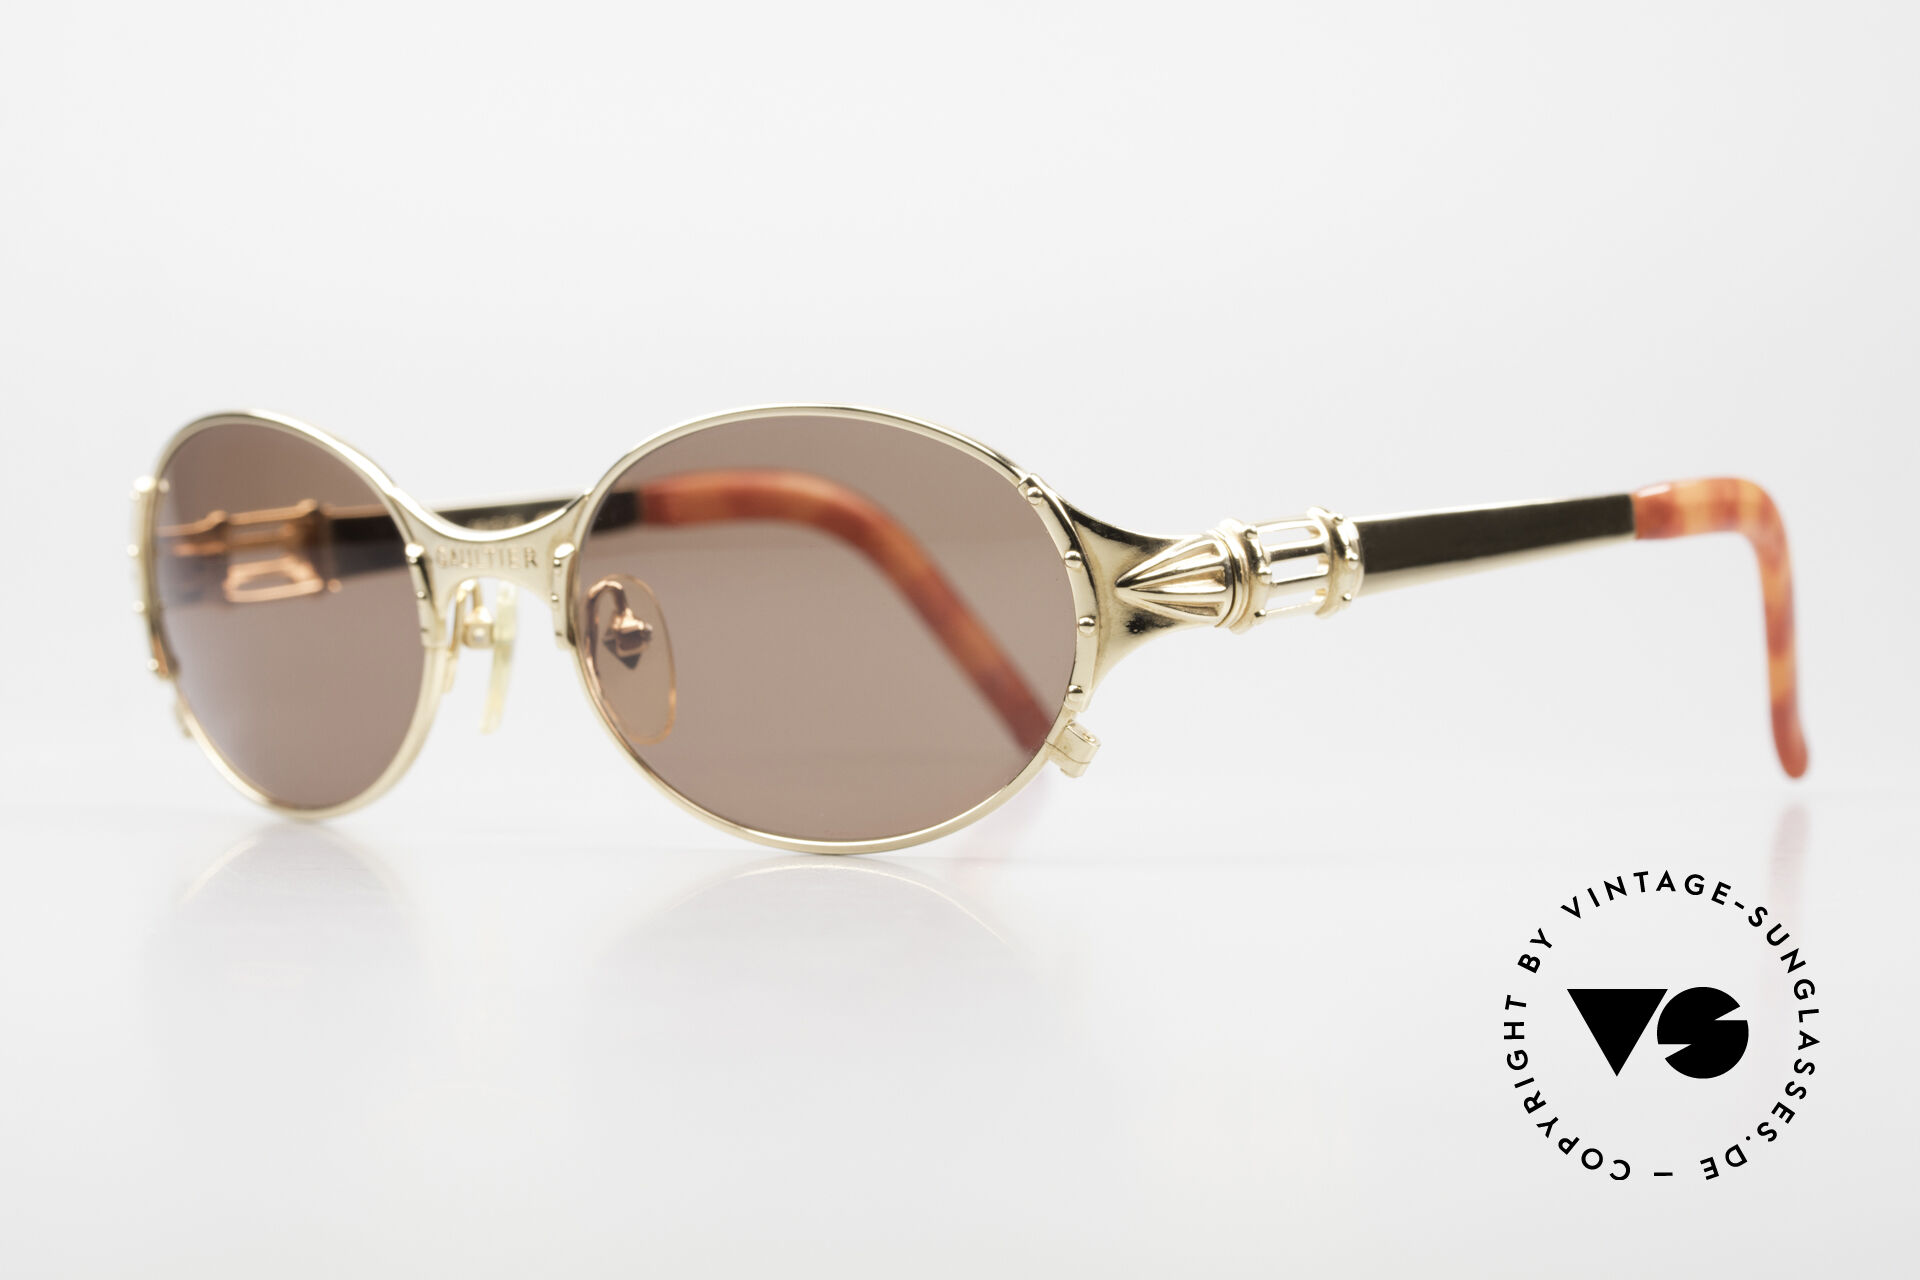 Jean Paul Gaultier 56-5106 90's Sunglasses Gold-Plated